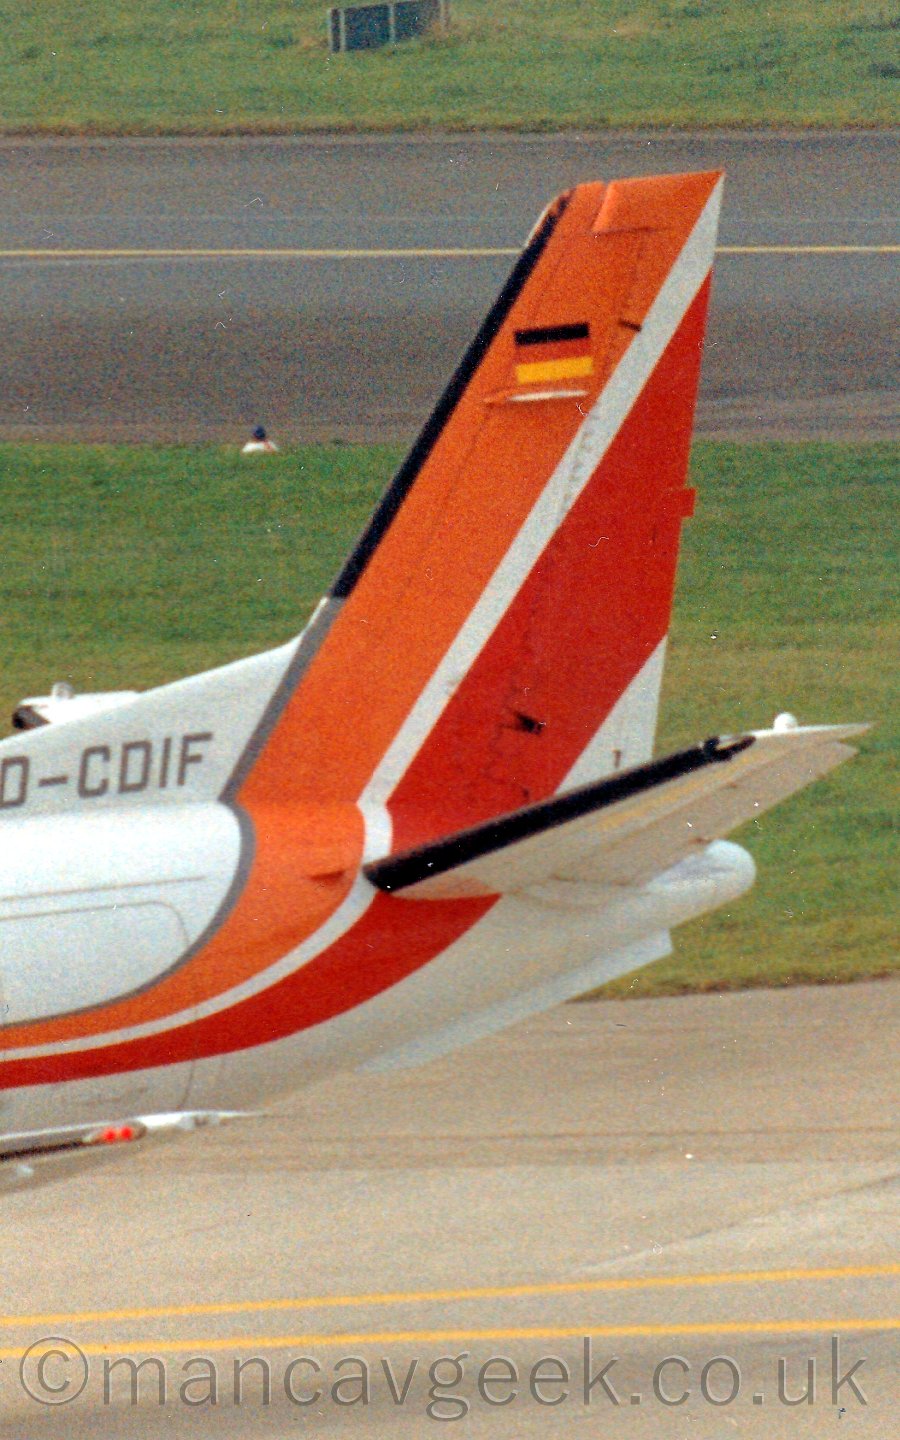 Closeup of the tail of a propellor-engined airliner taxiing from right to left. The plane is mostly white, with an orange and red stripe running along the body and sweeping up in to the tail. The registration "D-CDIF" is on the front of the base of the tail. In the background, a runway has grassed areas on either side.